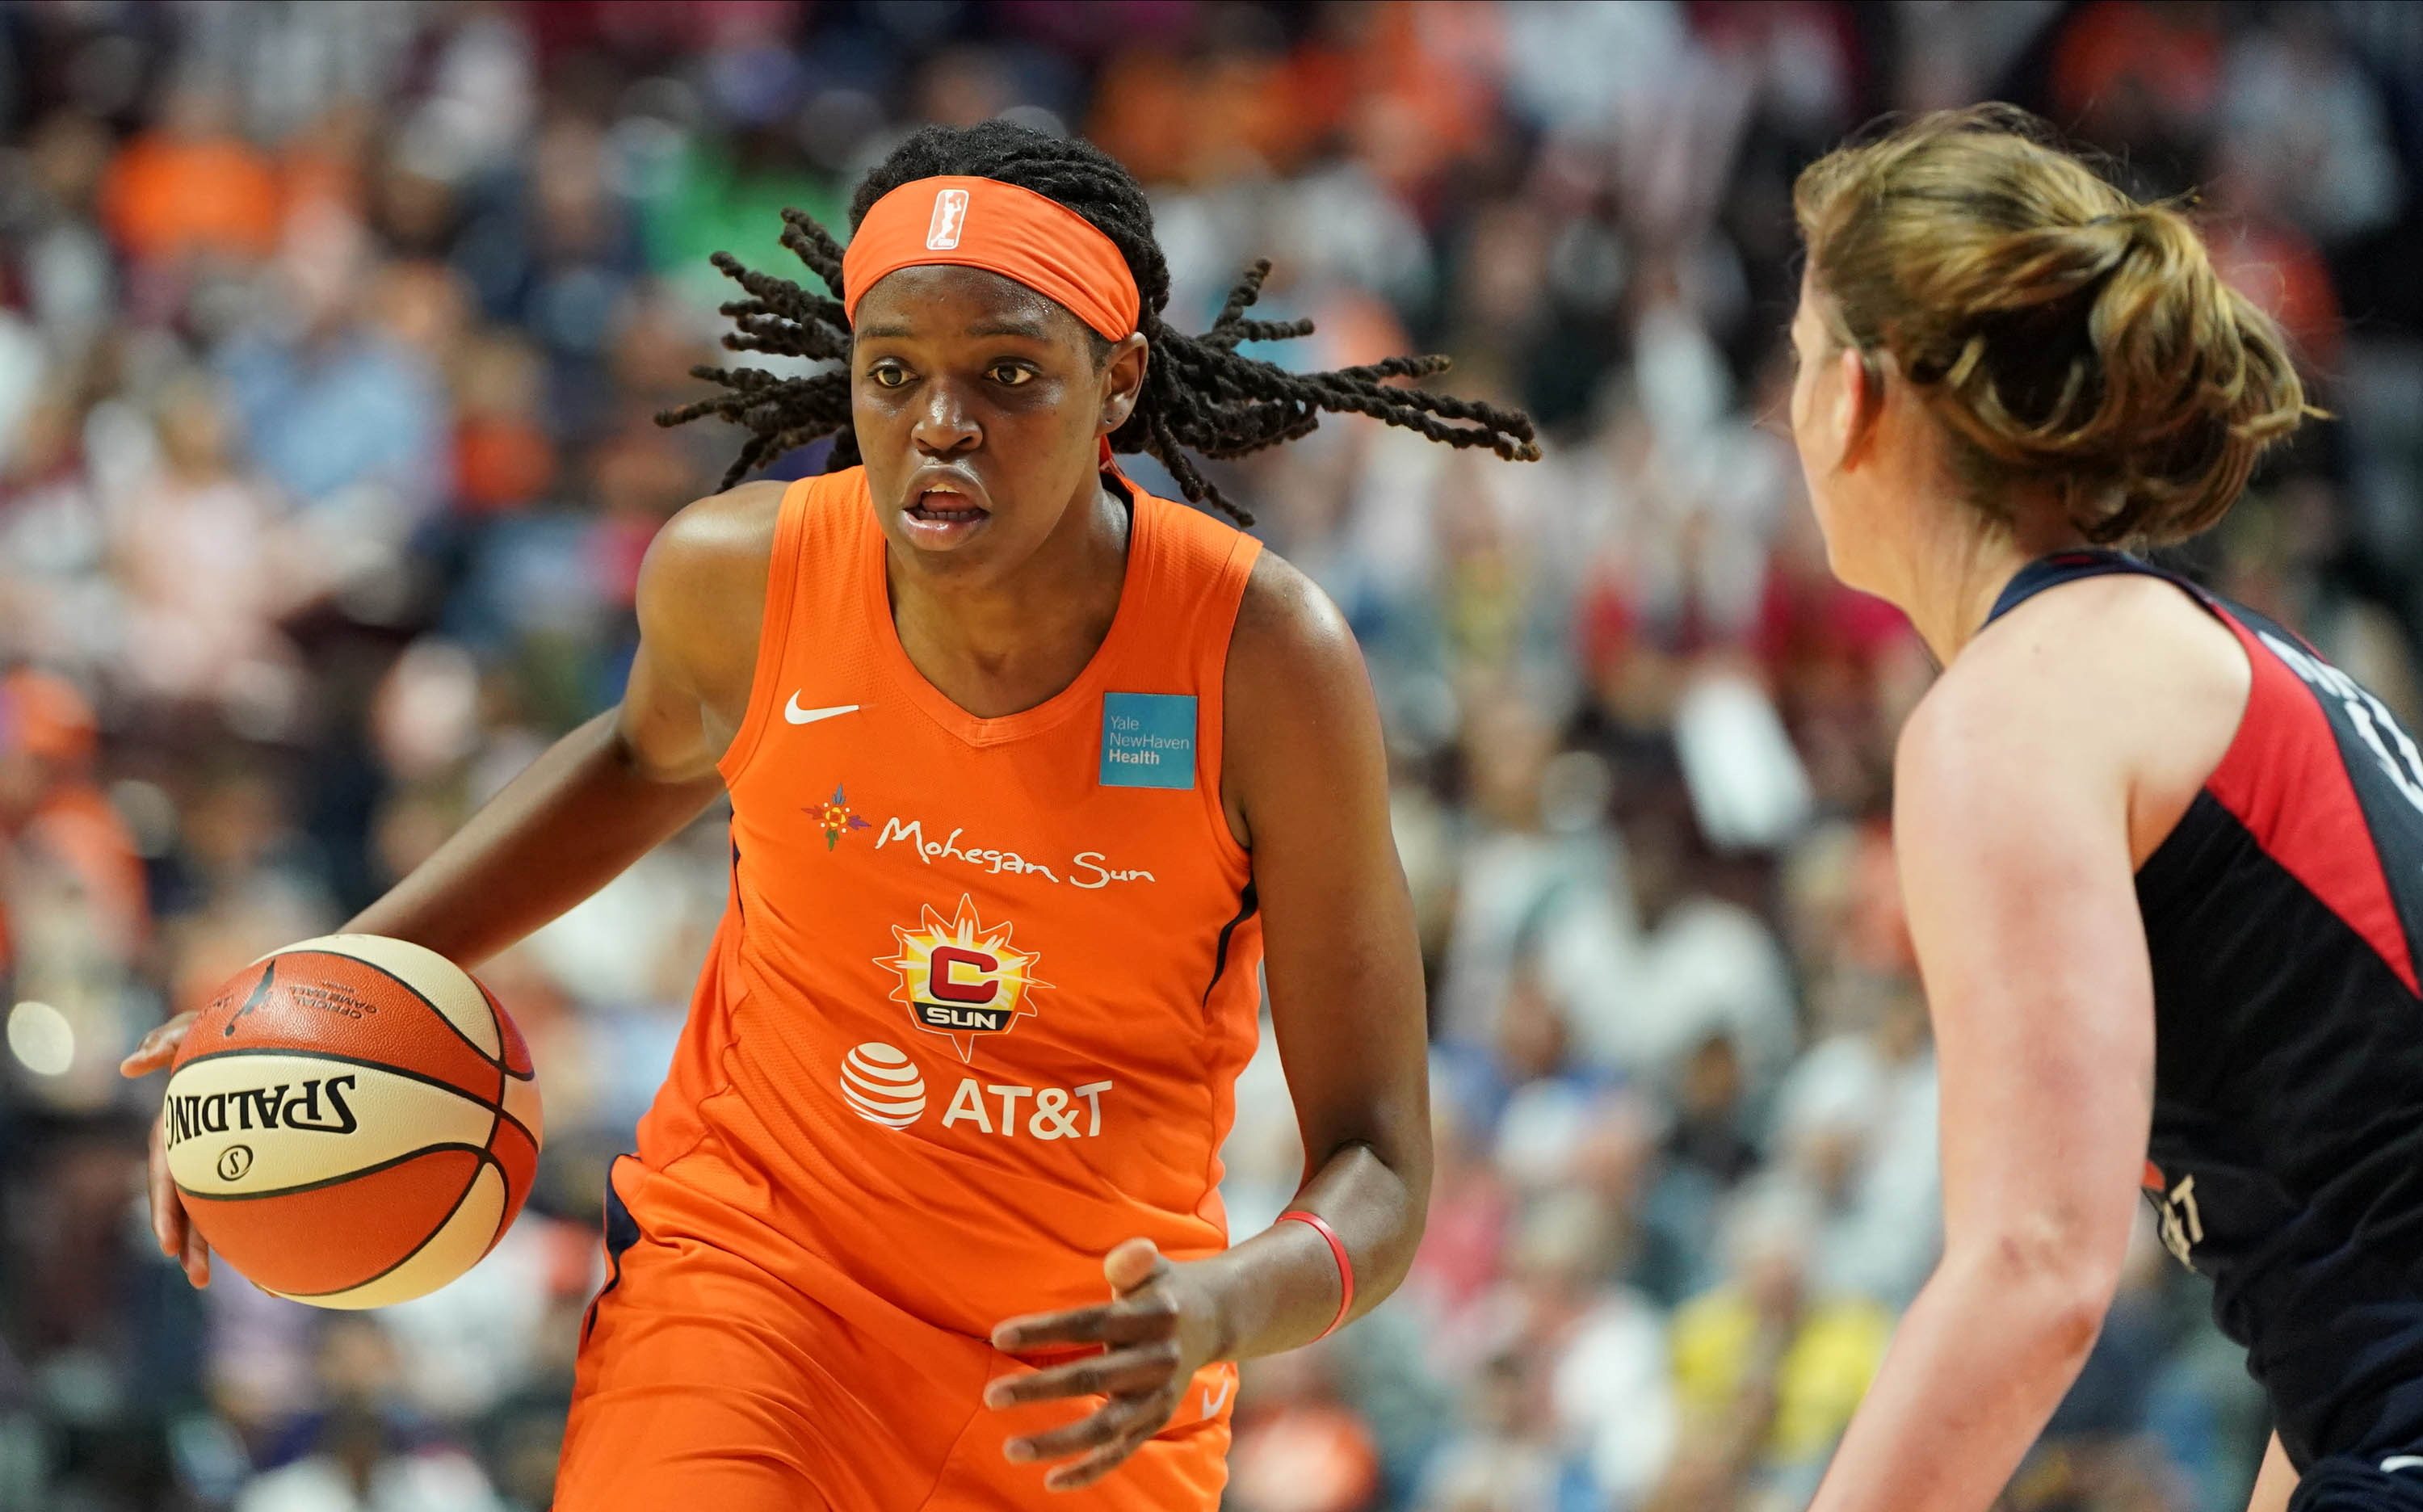 With an 'underdog' mentality, Connecticut's Jones snares WNBA MVP